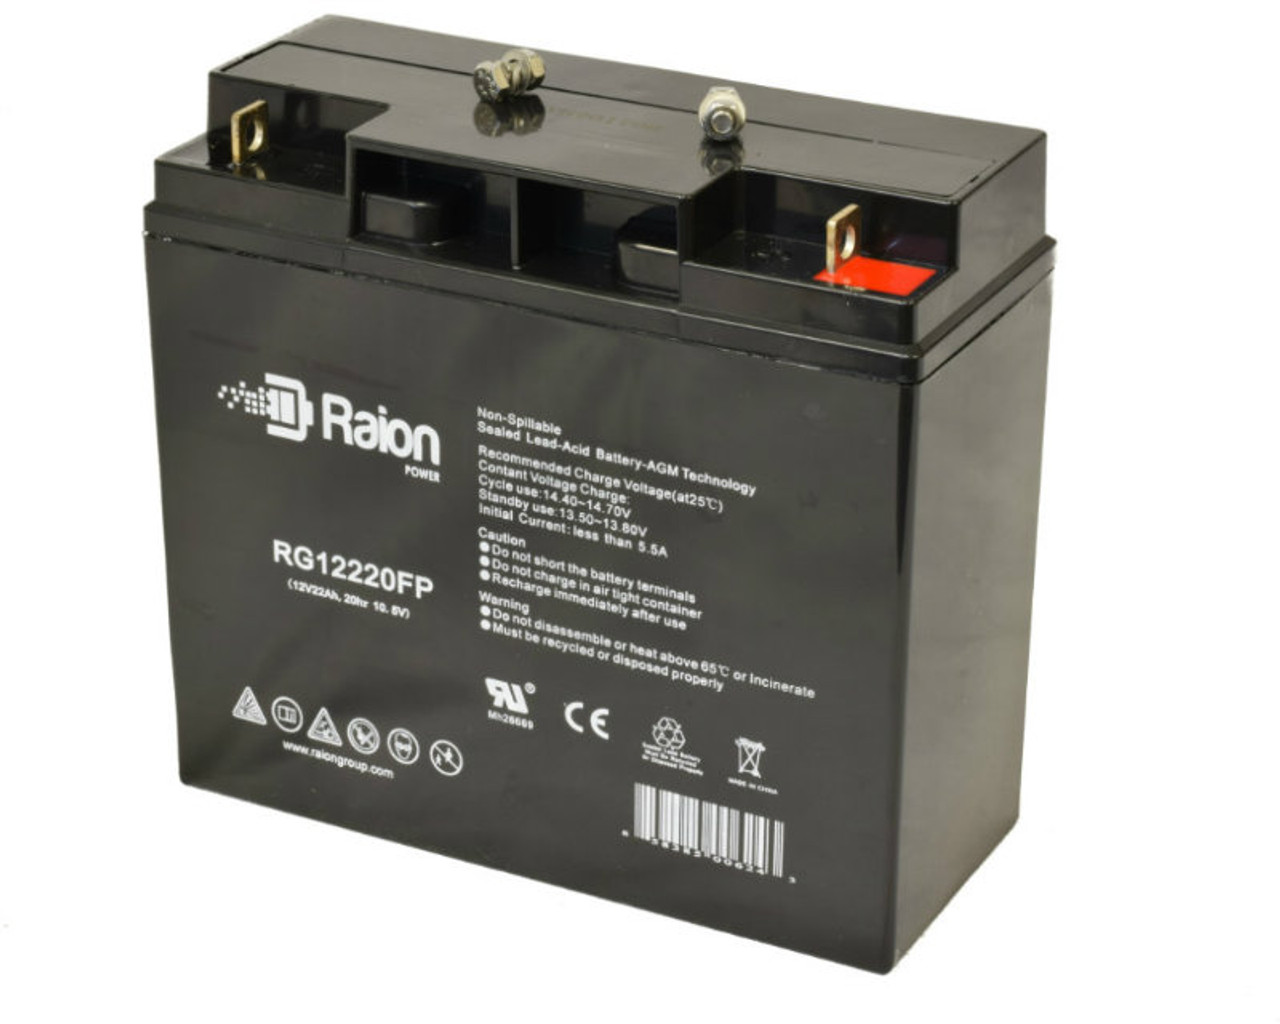 Raion Power RG12220FP 12V 22Ah Lead Acid Battery for Quick Cable Rescue 1800 Jump Pack 604053